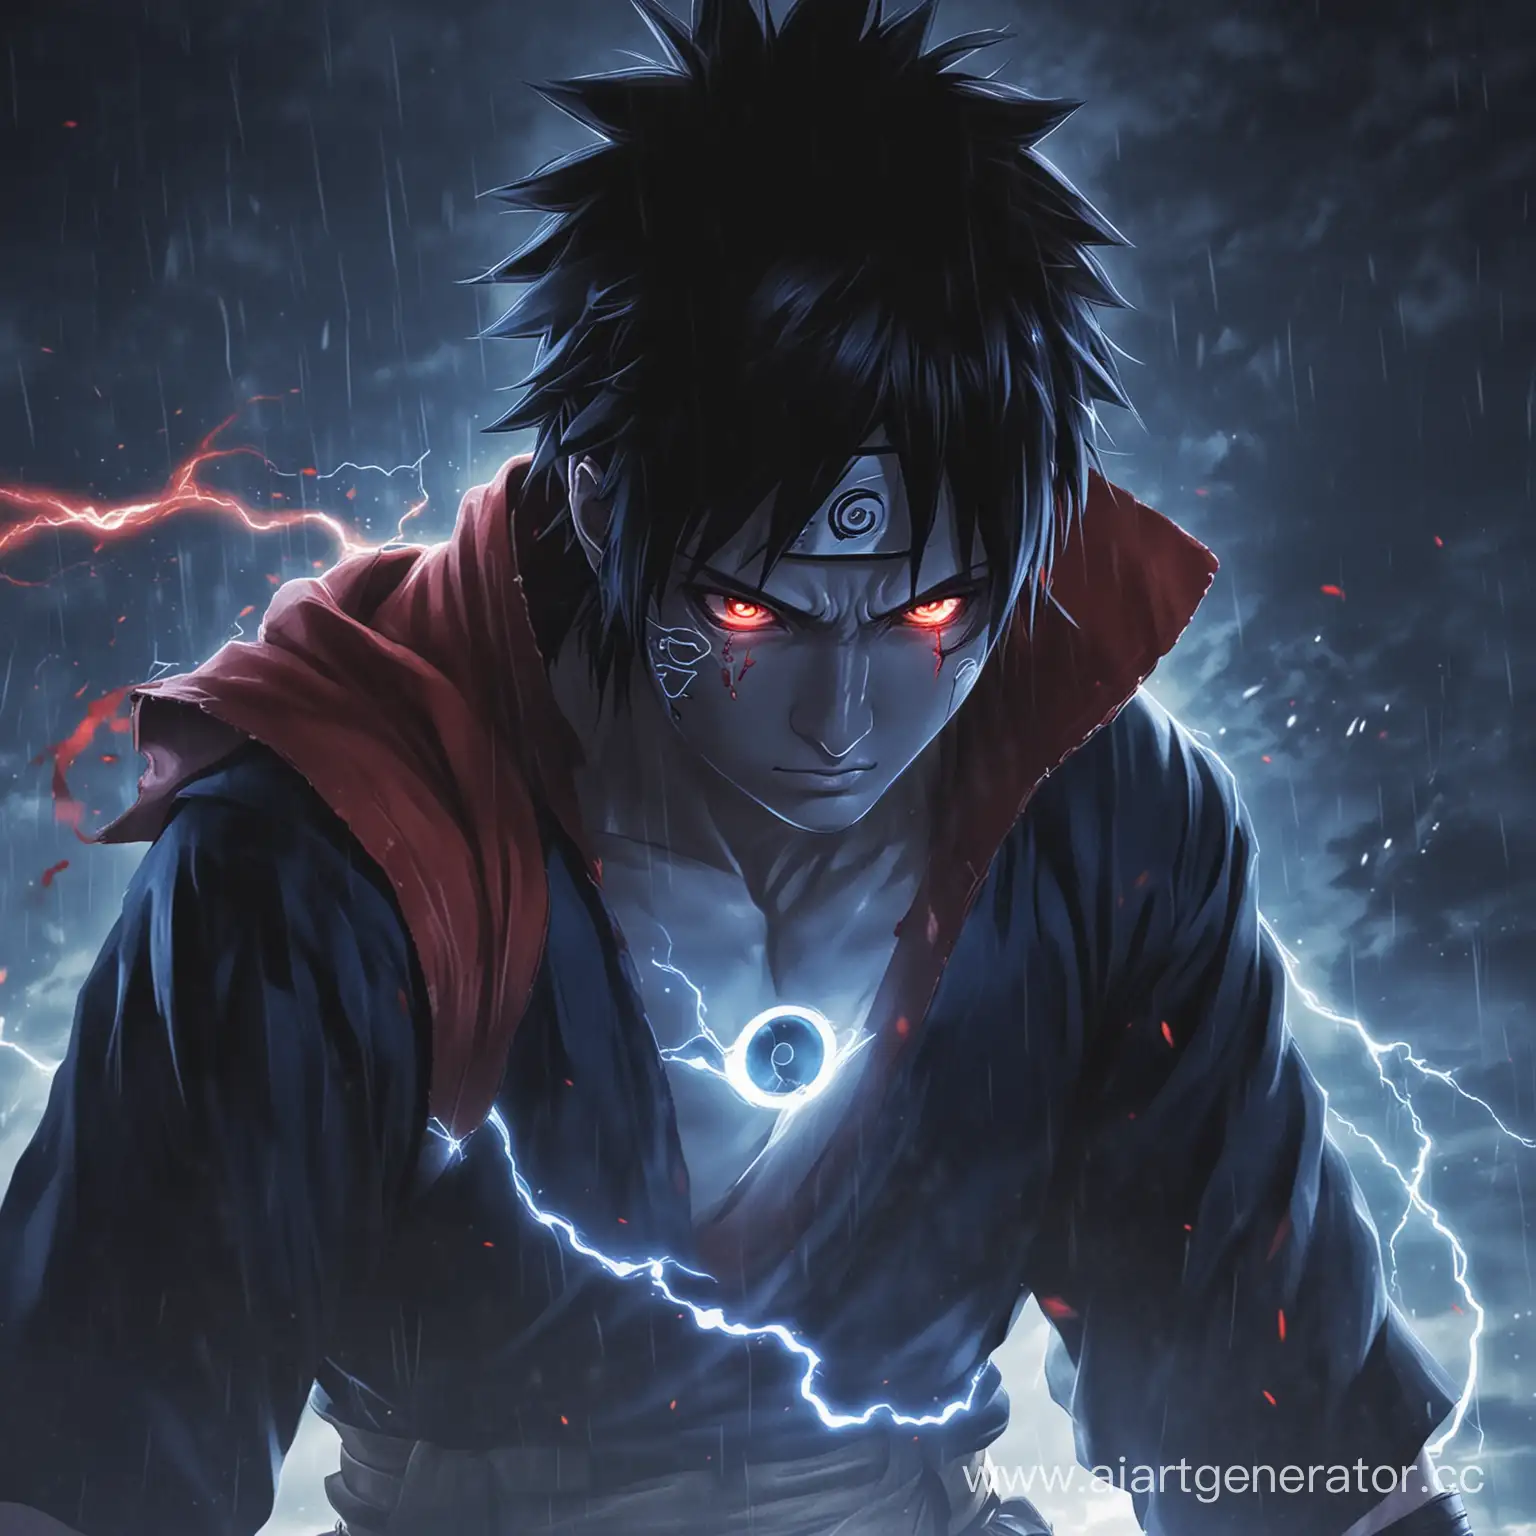 sasuke, Chidori Nagashi, blue lightning around the body, sharingan in the eyes, red eyes, valley of completion on the background, night, serious face